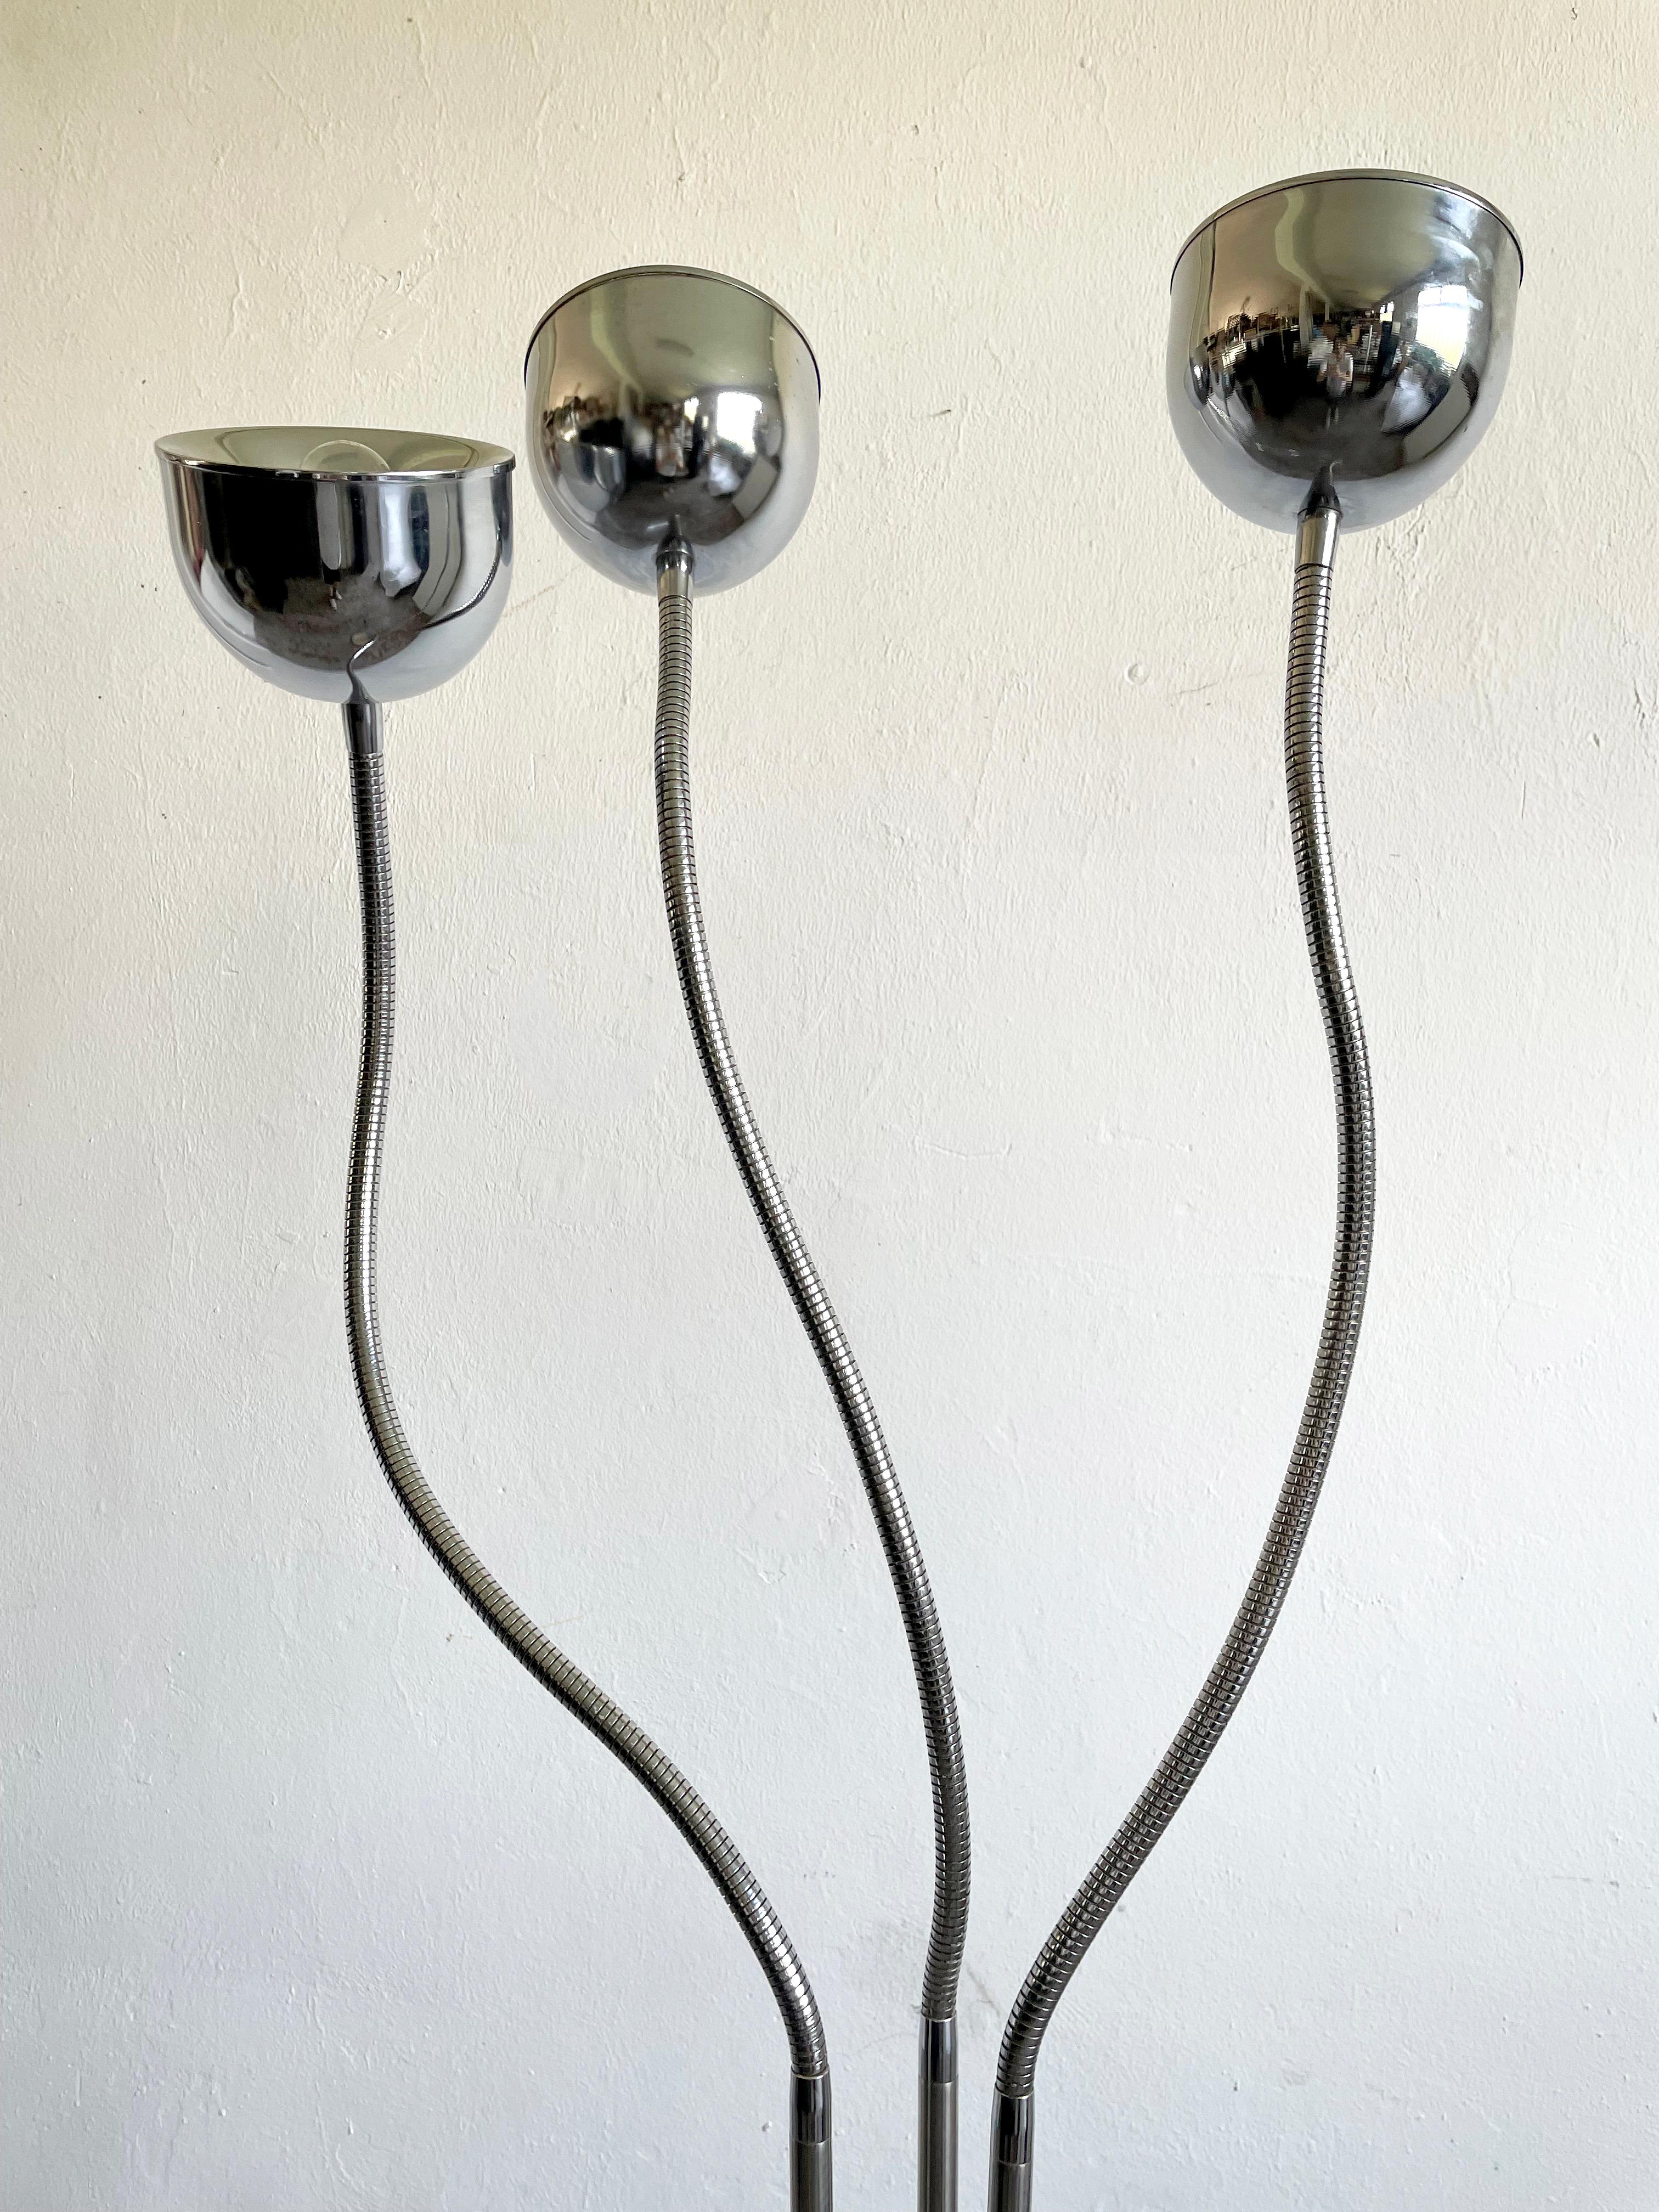 20th Century Vintage Italian Chrome Floor Lamp in style of Reggiani, Space Age Lamp, 1970s For Sale